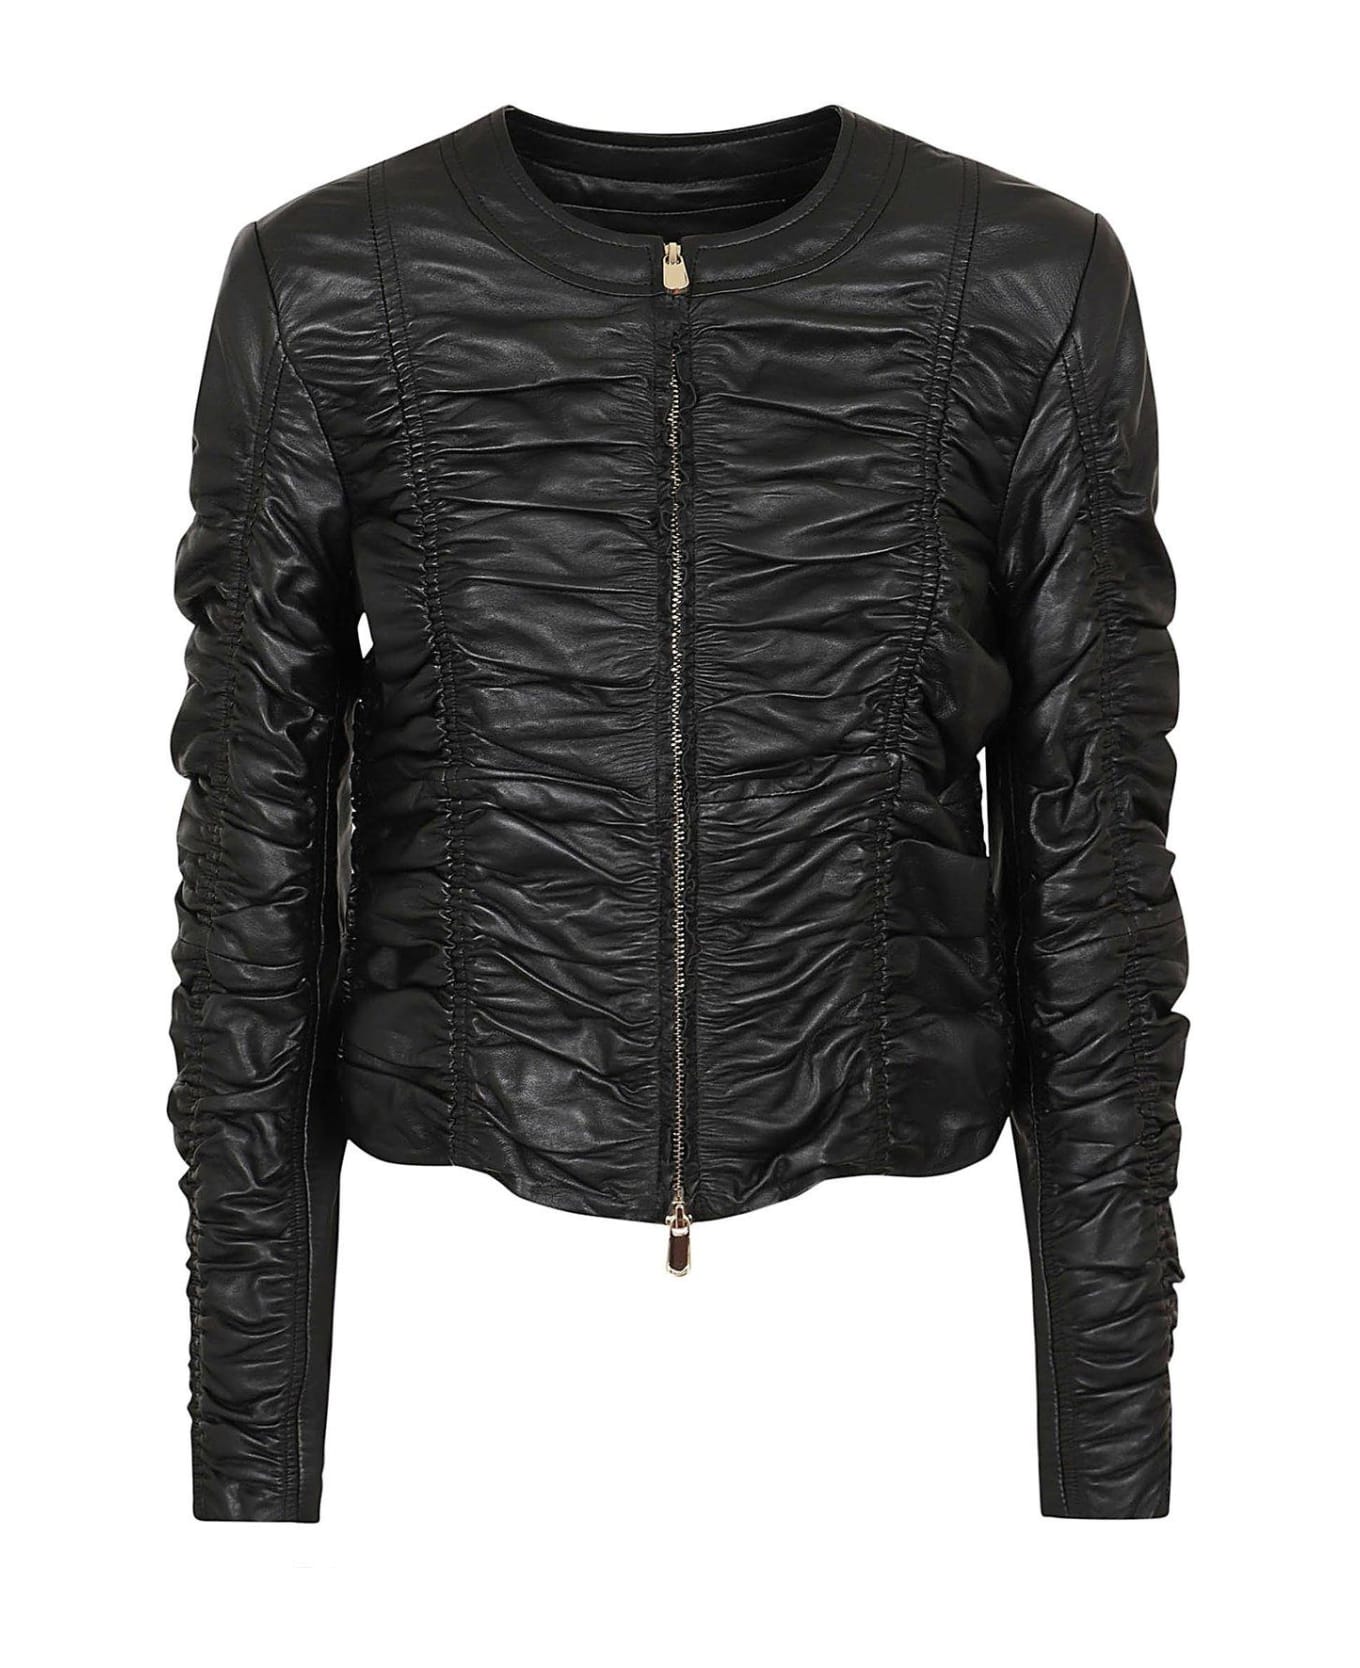 Pinko Ruched Detail Leather Jacket - Nero Limousine